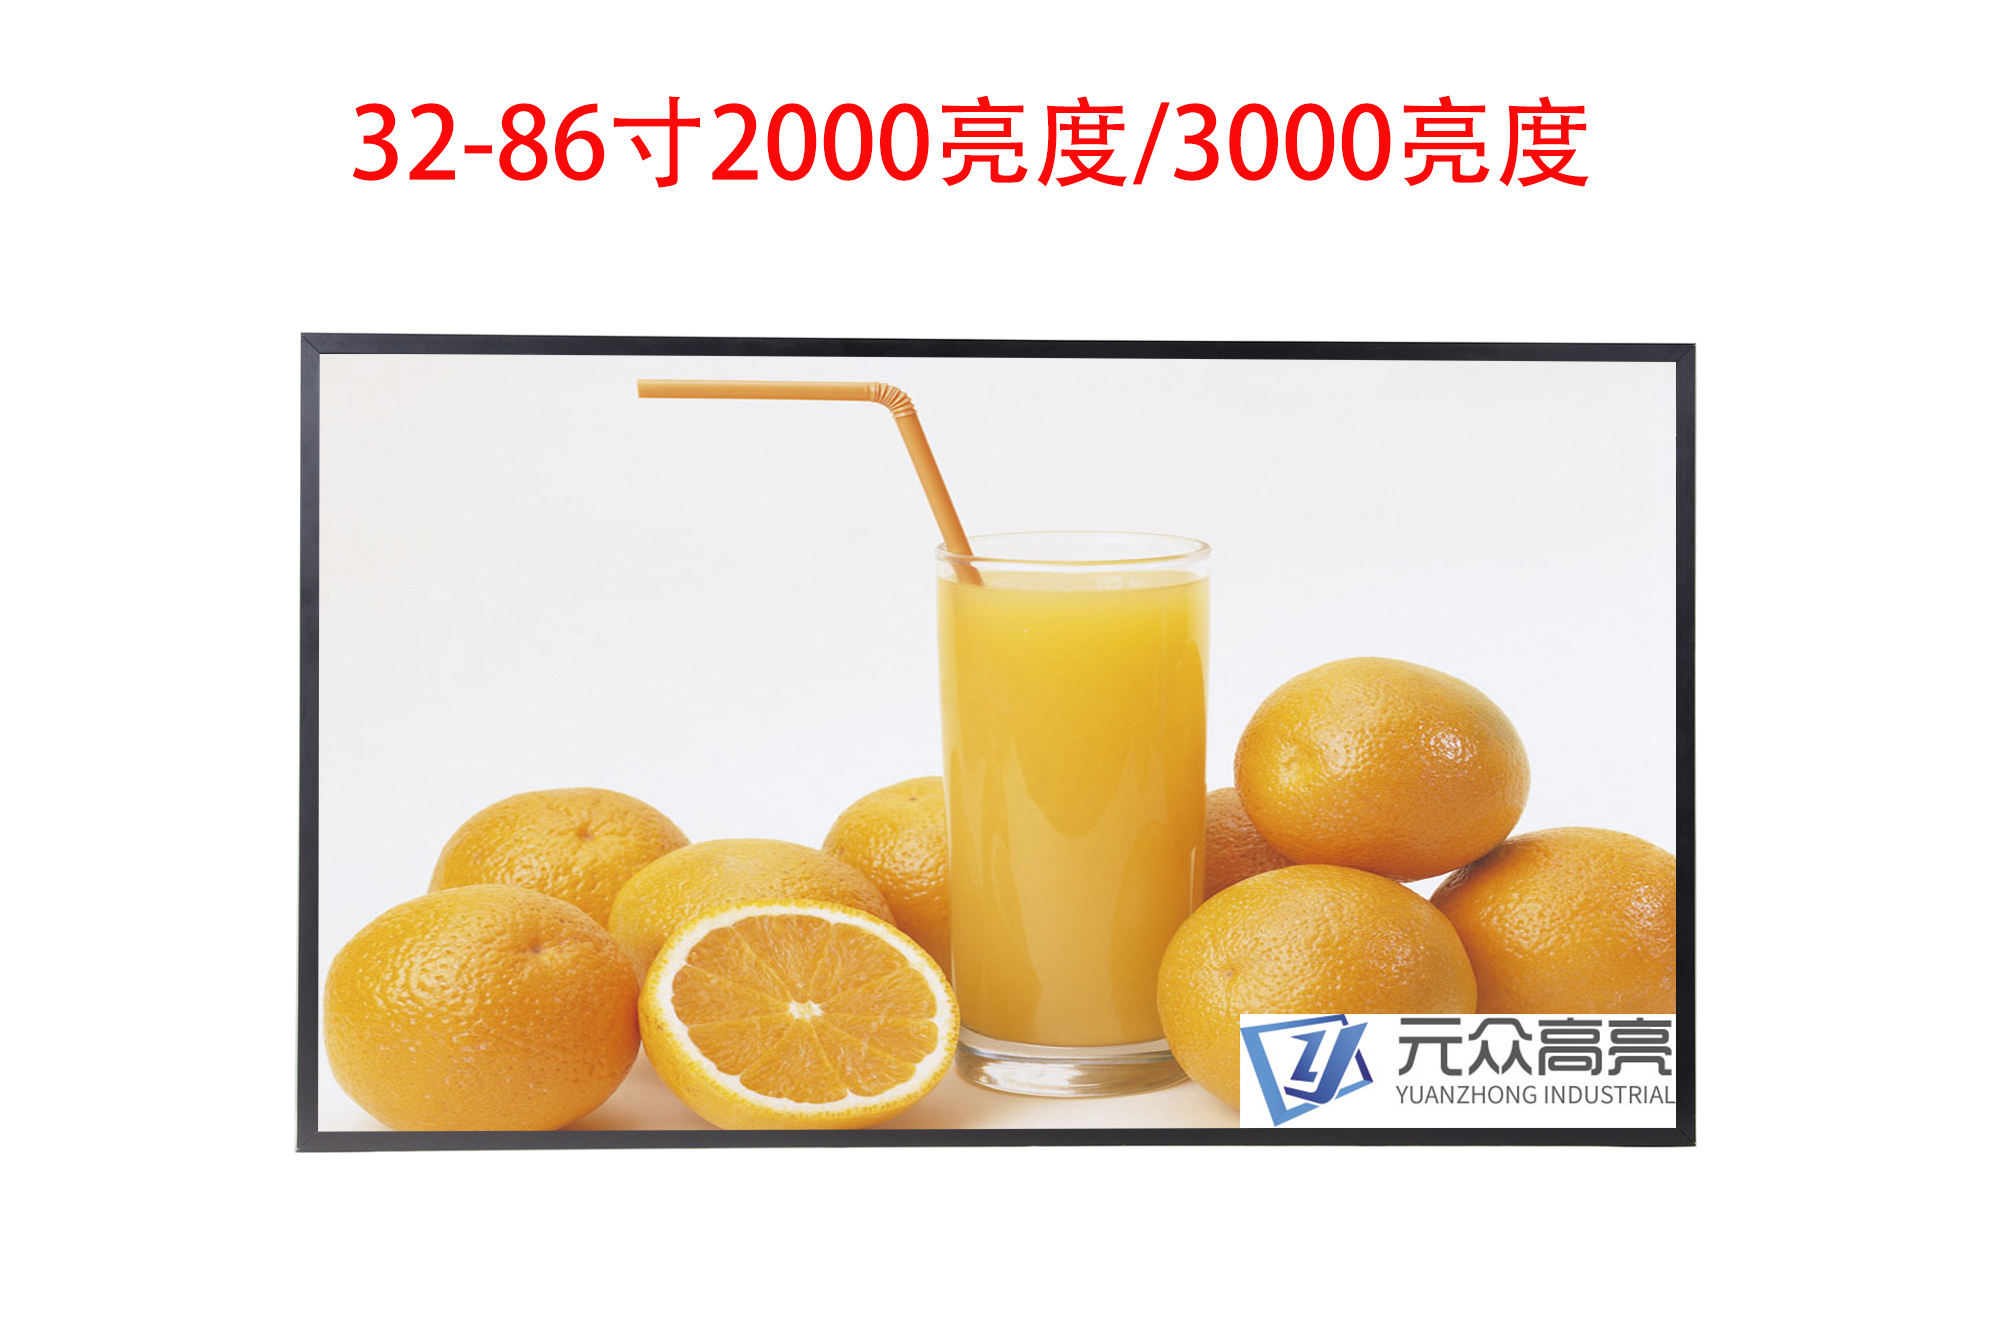 32inch 2500Nits Customized Sunlight Readable High Bright Lcd Display Monitor Screen Module